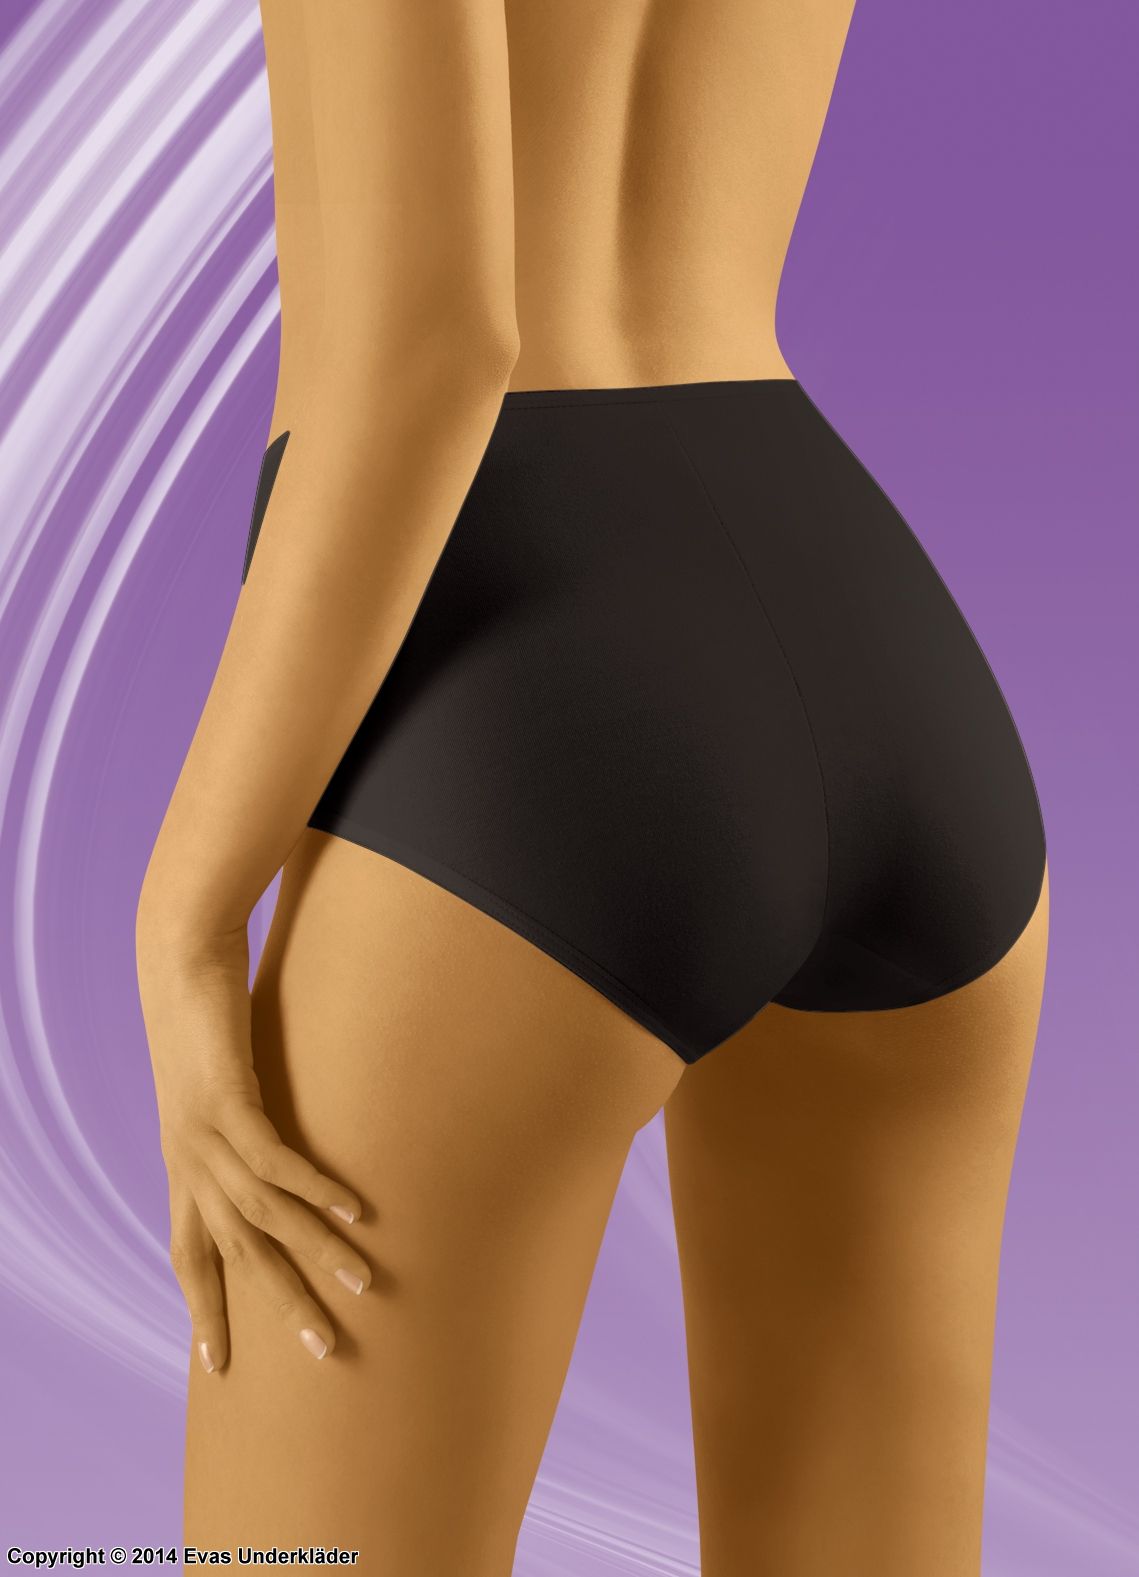 Maxi briefs, smooth and comfortable fabric, high waist, S to 3XL, 2-pack